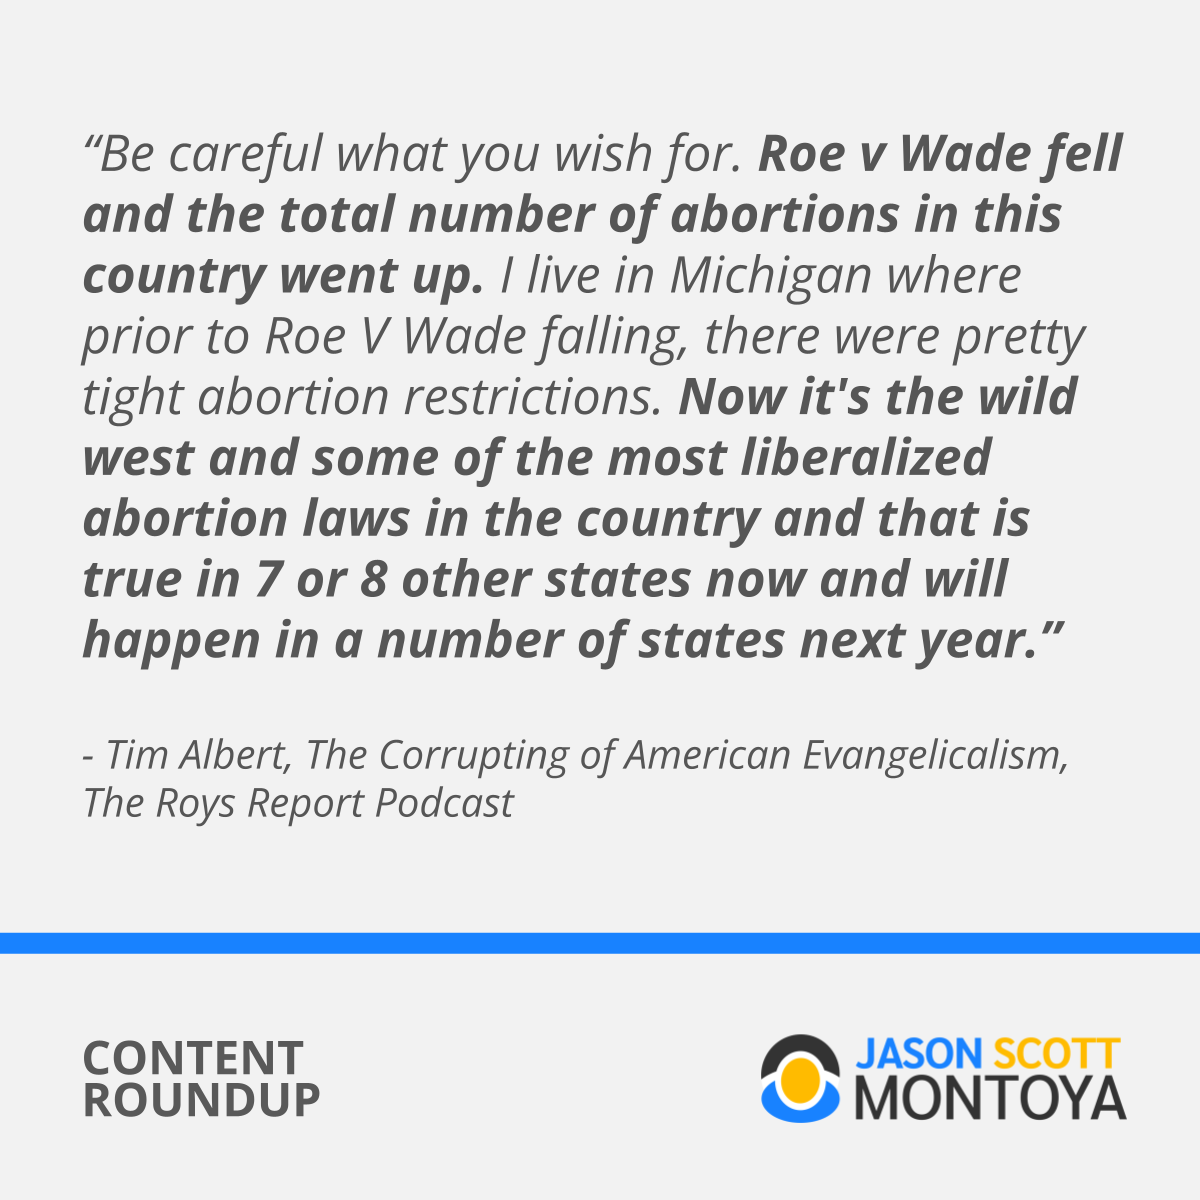 "Be careful what you wish for. Roe v Wade fell and the total number of abortions in this country went up. I live in Michigan where prior to Roe V Wade falling, there were pretty tight abortion restrictions. Now it’s the wild west and some of the most liberalized abortion laws in the country and that is true in 7 or 8 other states now and will happen in a number of states next year.